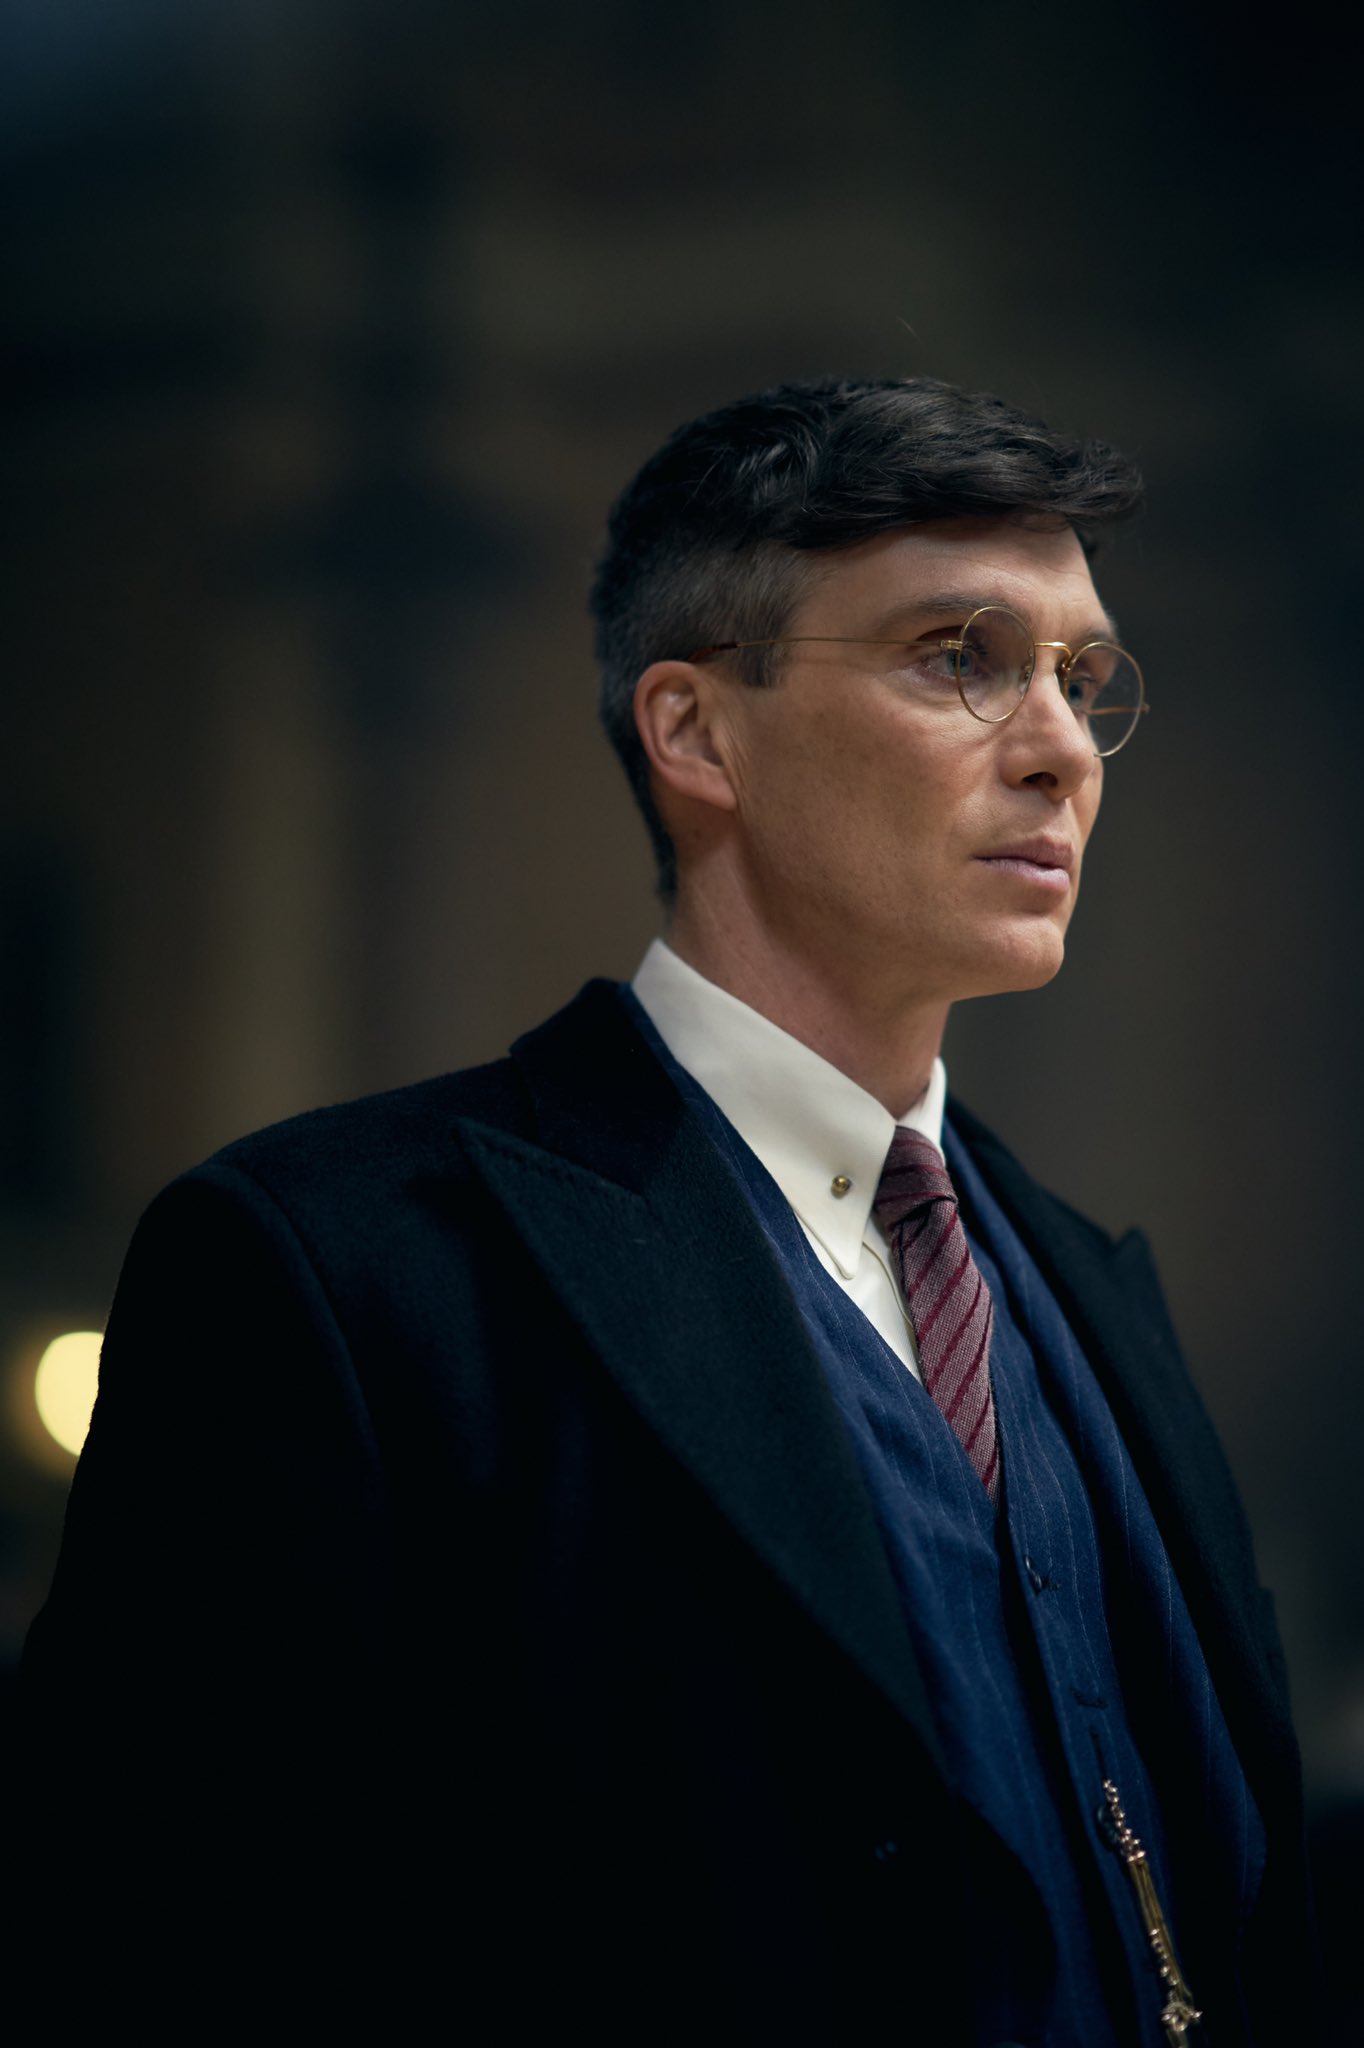 Peaky Blinders Twitter: "“I have no limitations” Cillian Murphy has won the Best Actor Award for his role as Tommy Shelby in series six of Peaky Blinders at the #tvchoiceawards! Thank